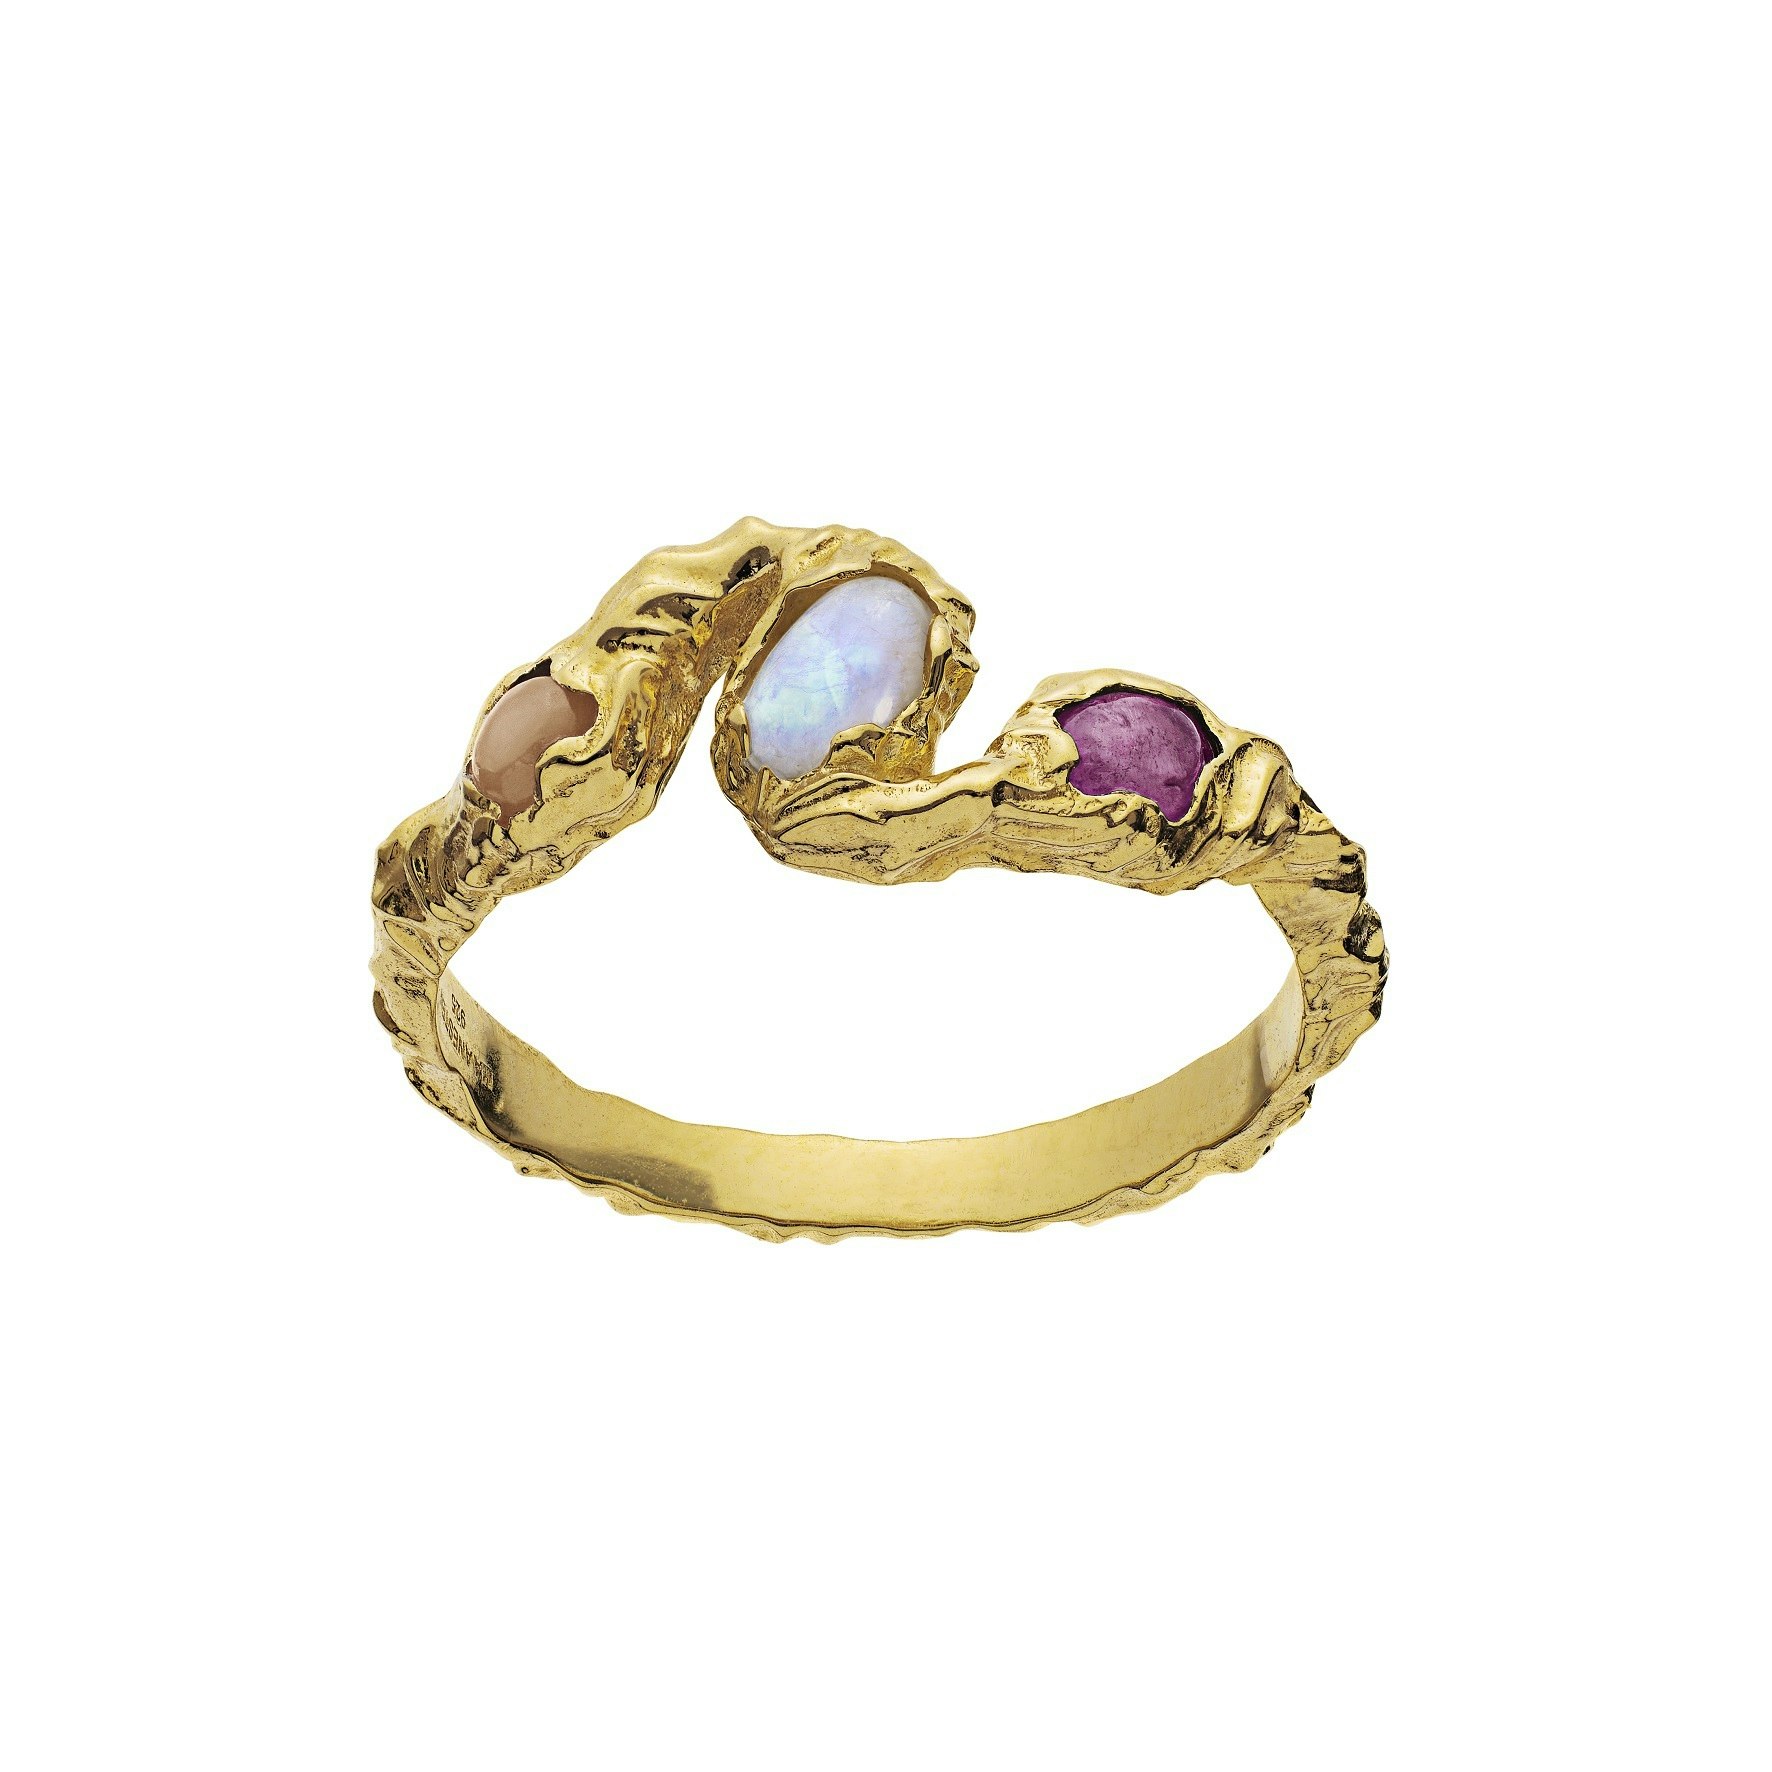 Baila Ring from Maanesten in Goldplated Silver Sterling 925